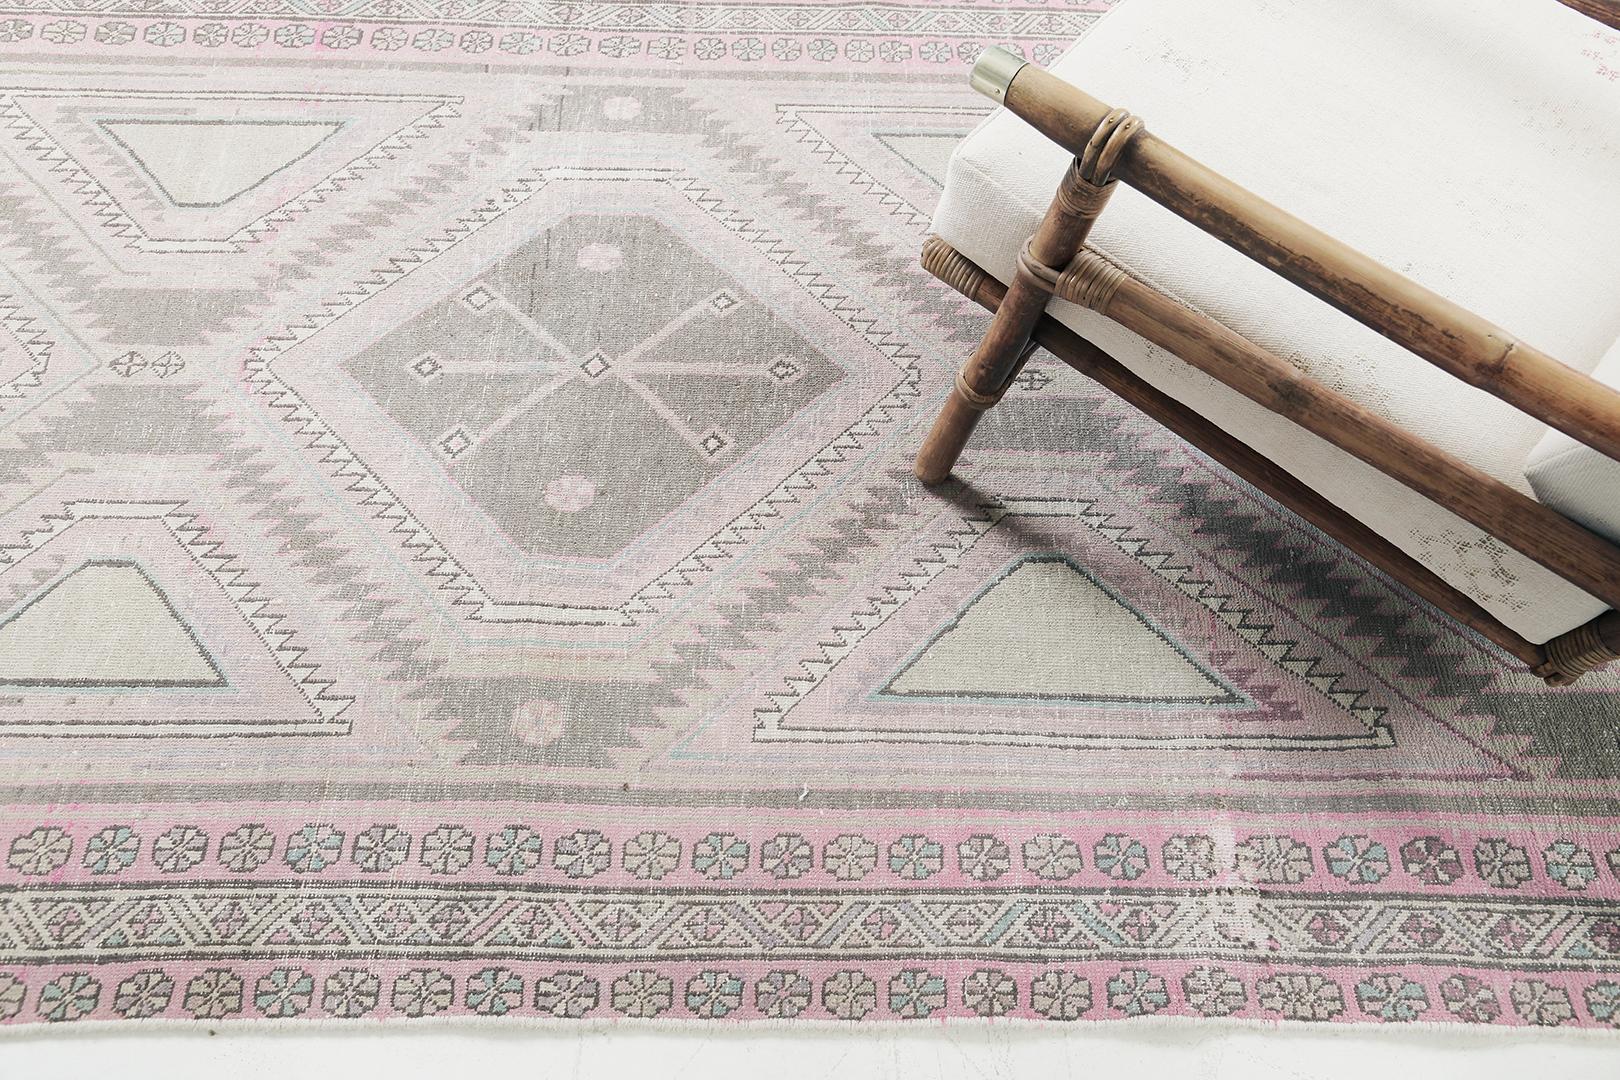 Featuring an impressive collaboration of awe-inspiring colour palette, this Vintage Persian Bakhtiari rug embodies three lozenge statement medallions that leaves an impeccable impact. Various geometric and florid images display beautifully along the